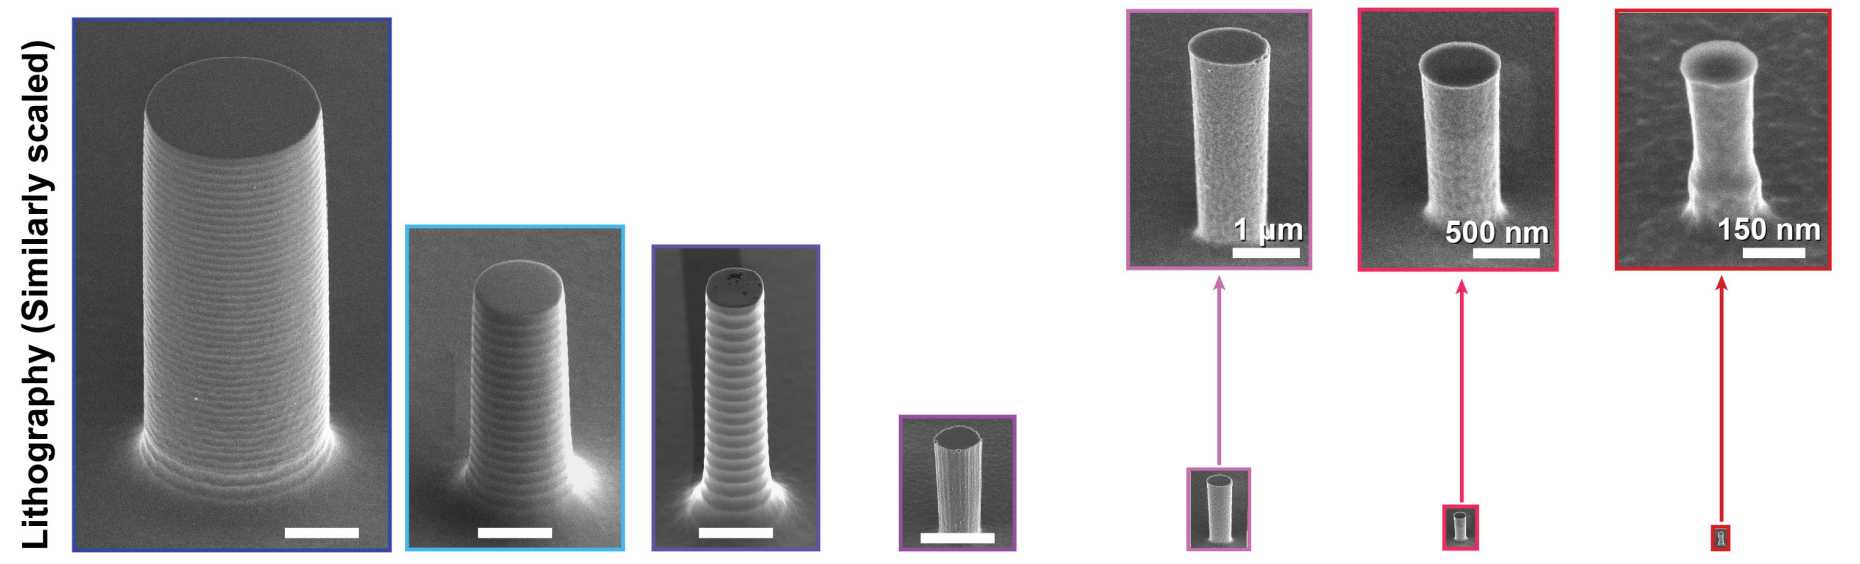 Silicon pillars of various sizes under the electron microscope. Widths range from 10 micrometres (left, the white bar corresponds to 3 micrometres) down to 150 nanometres. (after Chen M. et al, Nat Commun, 2020)